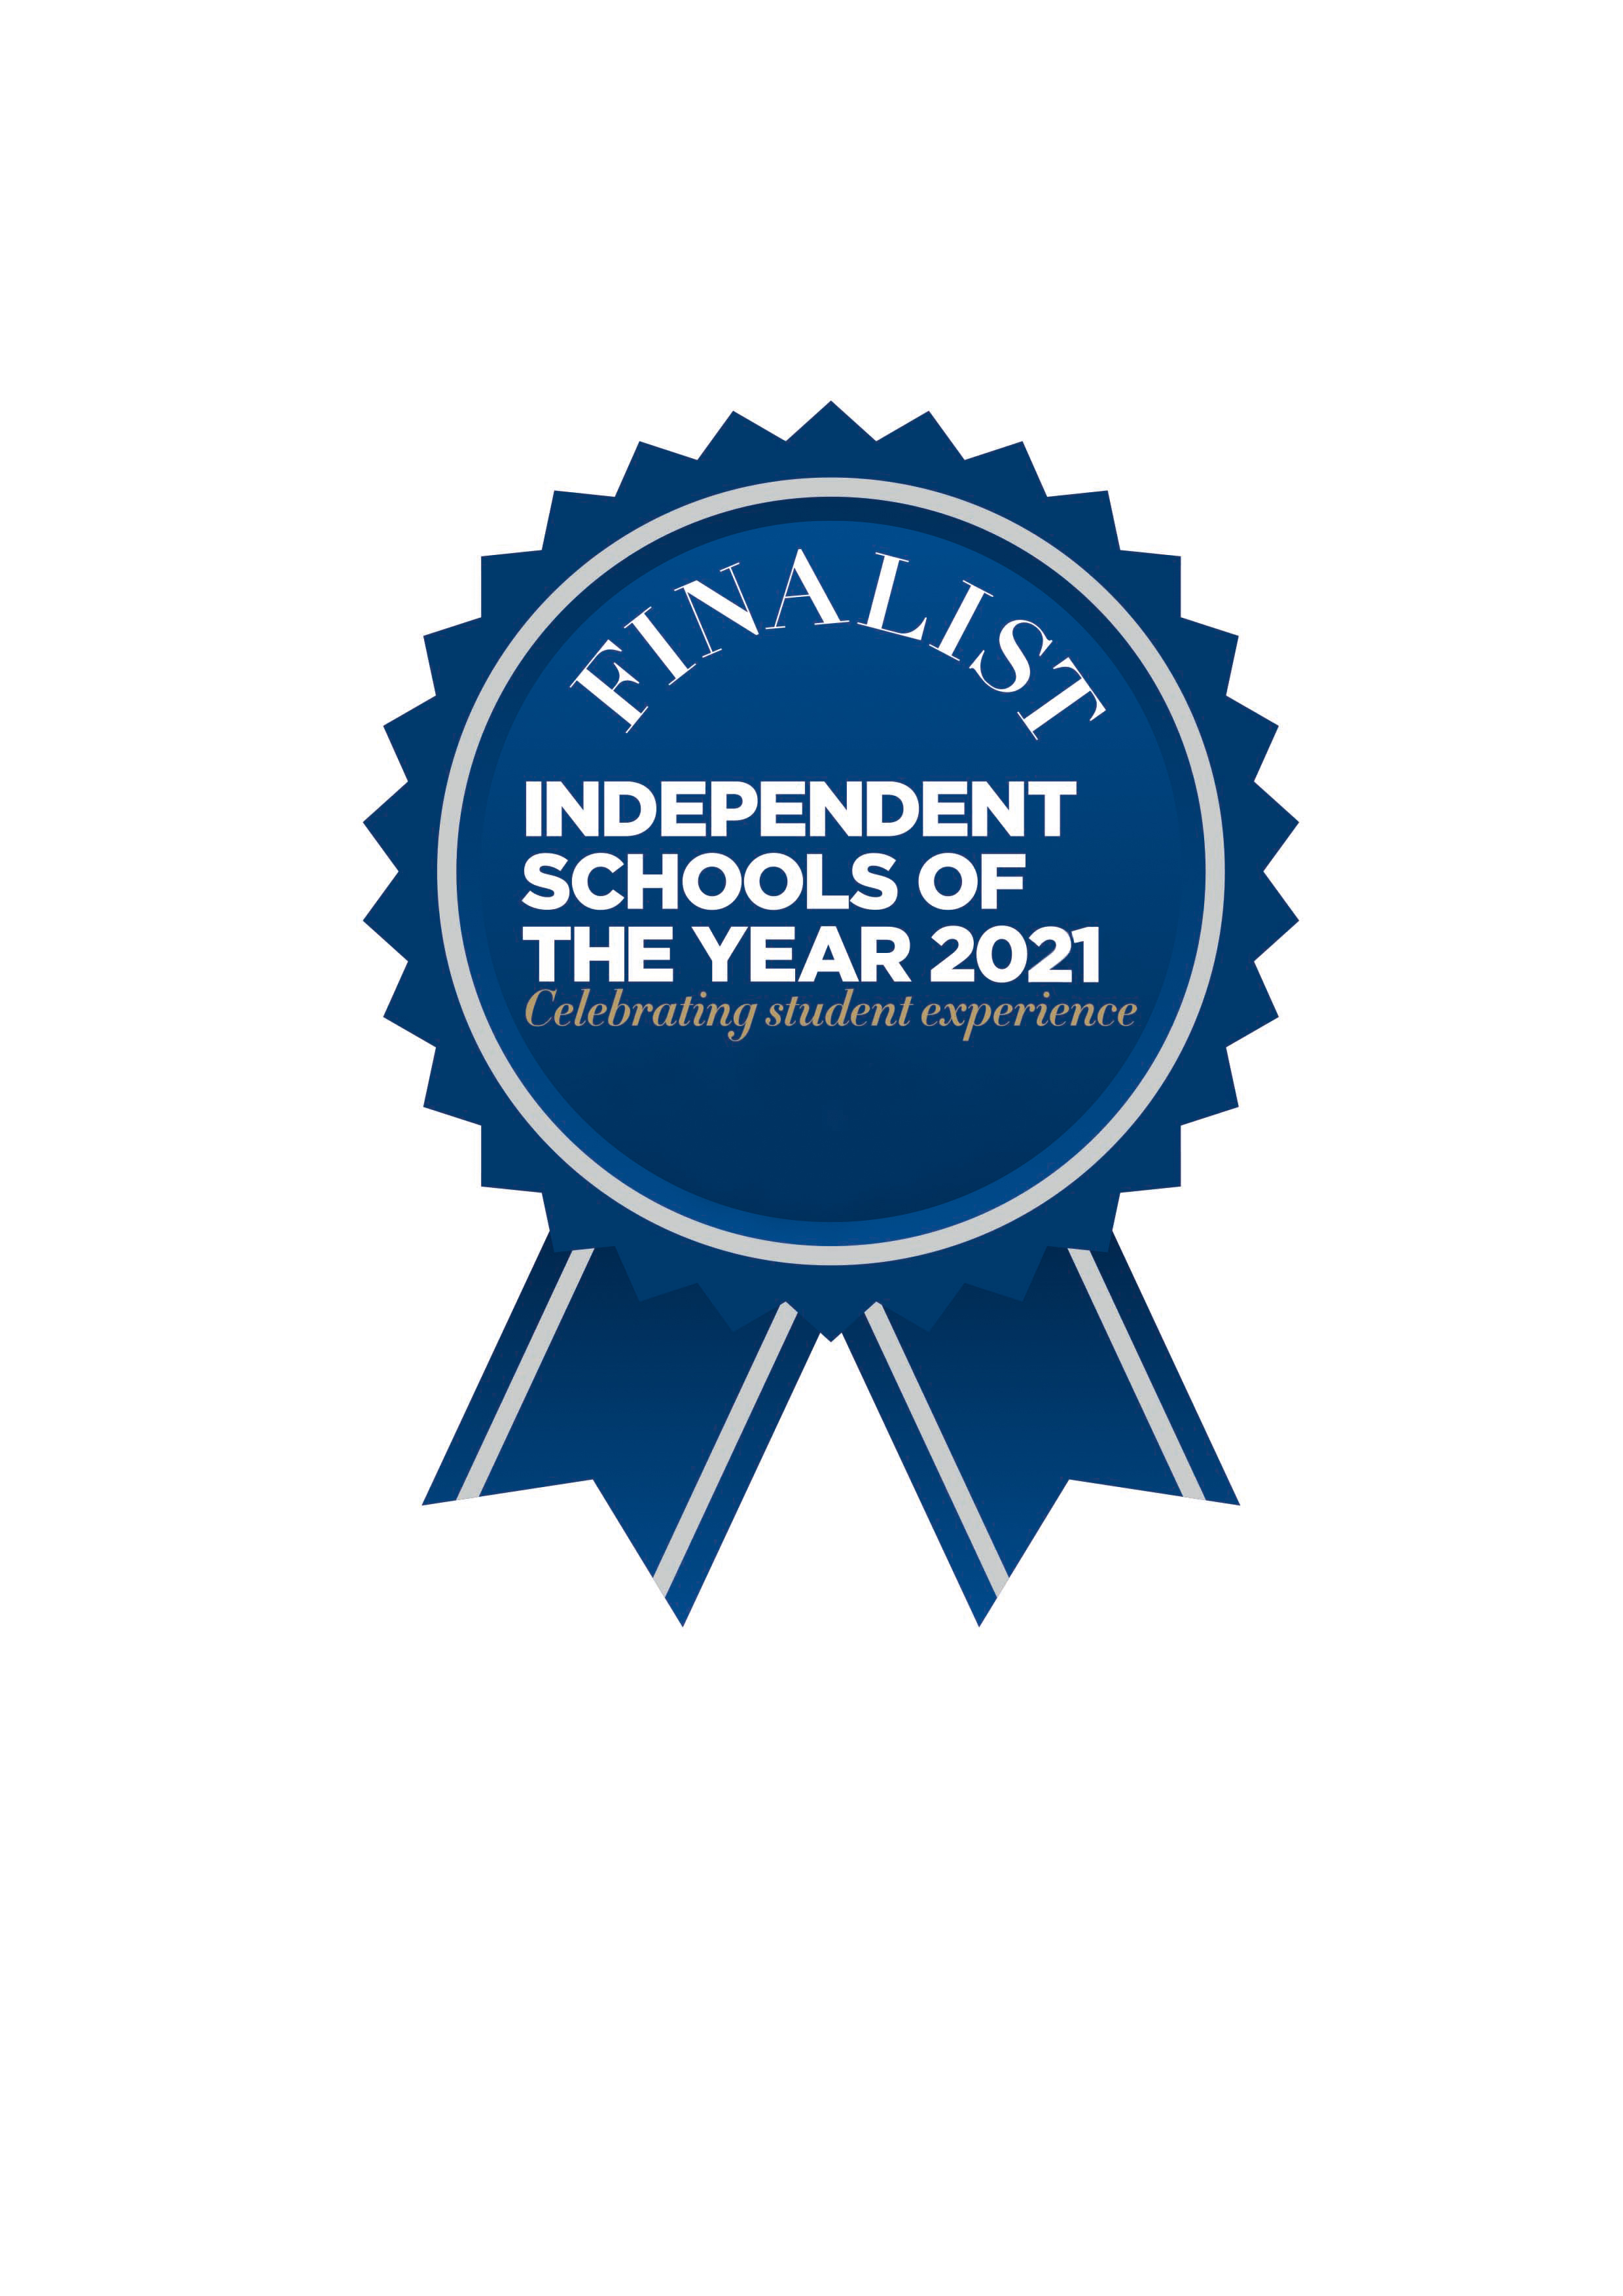 Finalists in the Independent School of the Year Awards!